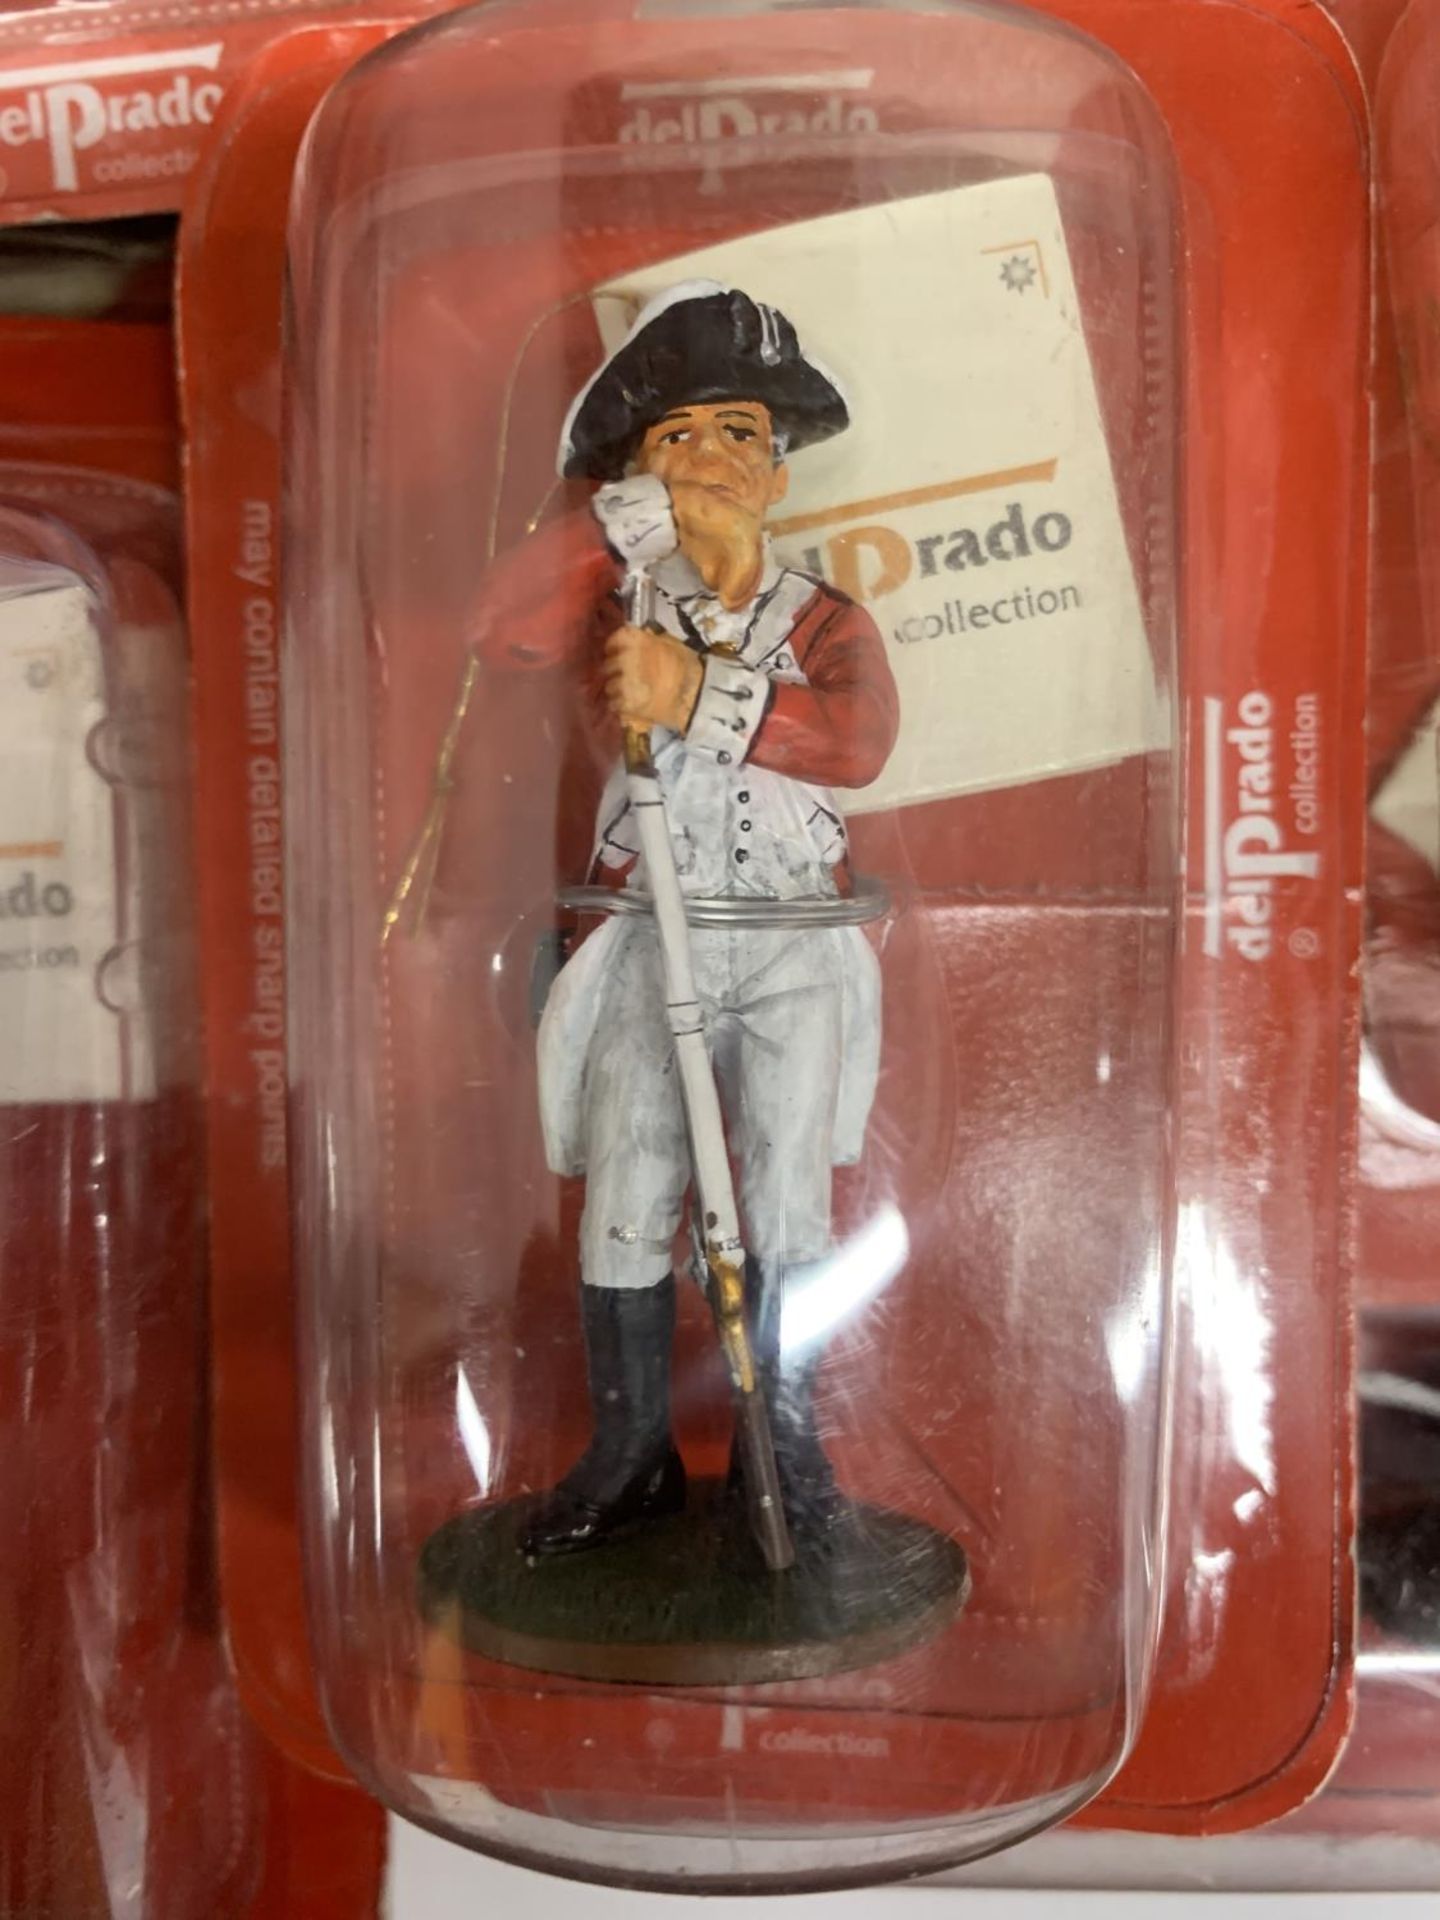 A LARGE COLLECTION OF DEL PRADO MILITARY FIGURES IN BLISTER PACKS - Bild 6 aus 8